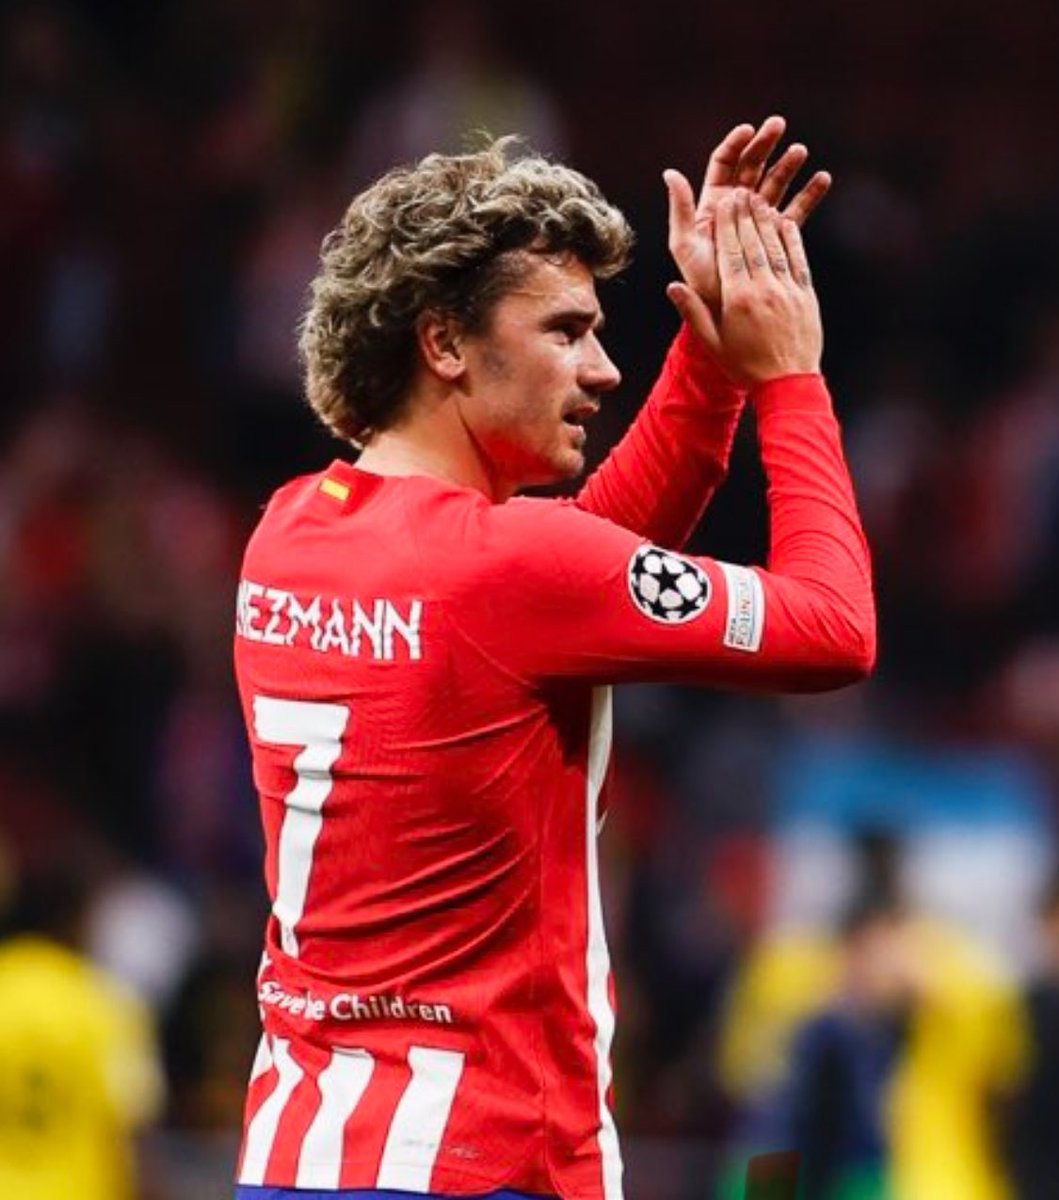 🚨| 𝙉𝙀𝙒𝙎 𝘼𝙇𝙀𝙍𝙏

‼️🇫🇷 Griezmann will miss next match (vs Mallorca) after seeing his 5X🟨 tonight 👀

#AtletiAthletic | #LaLiga